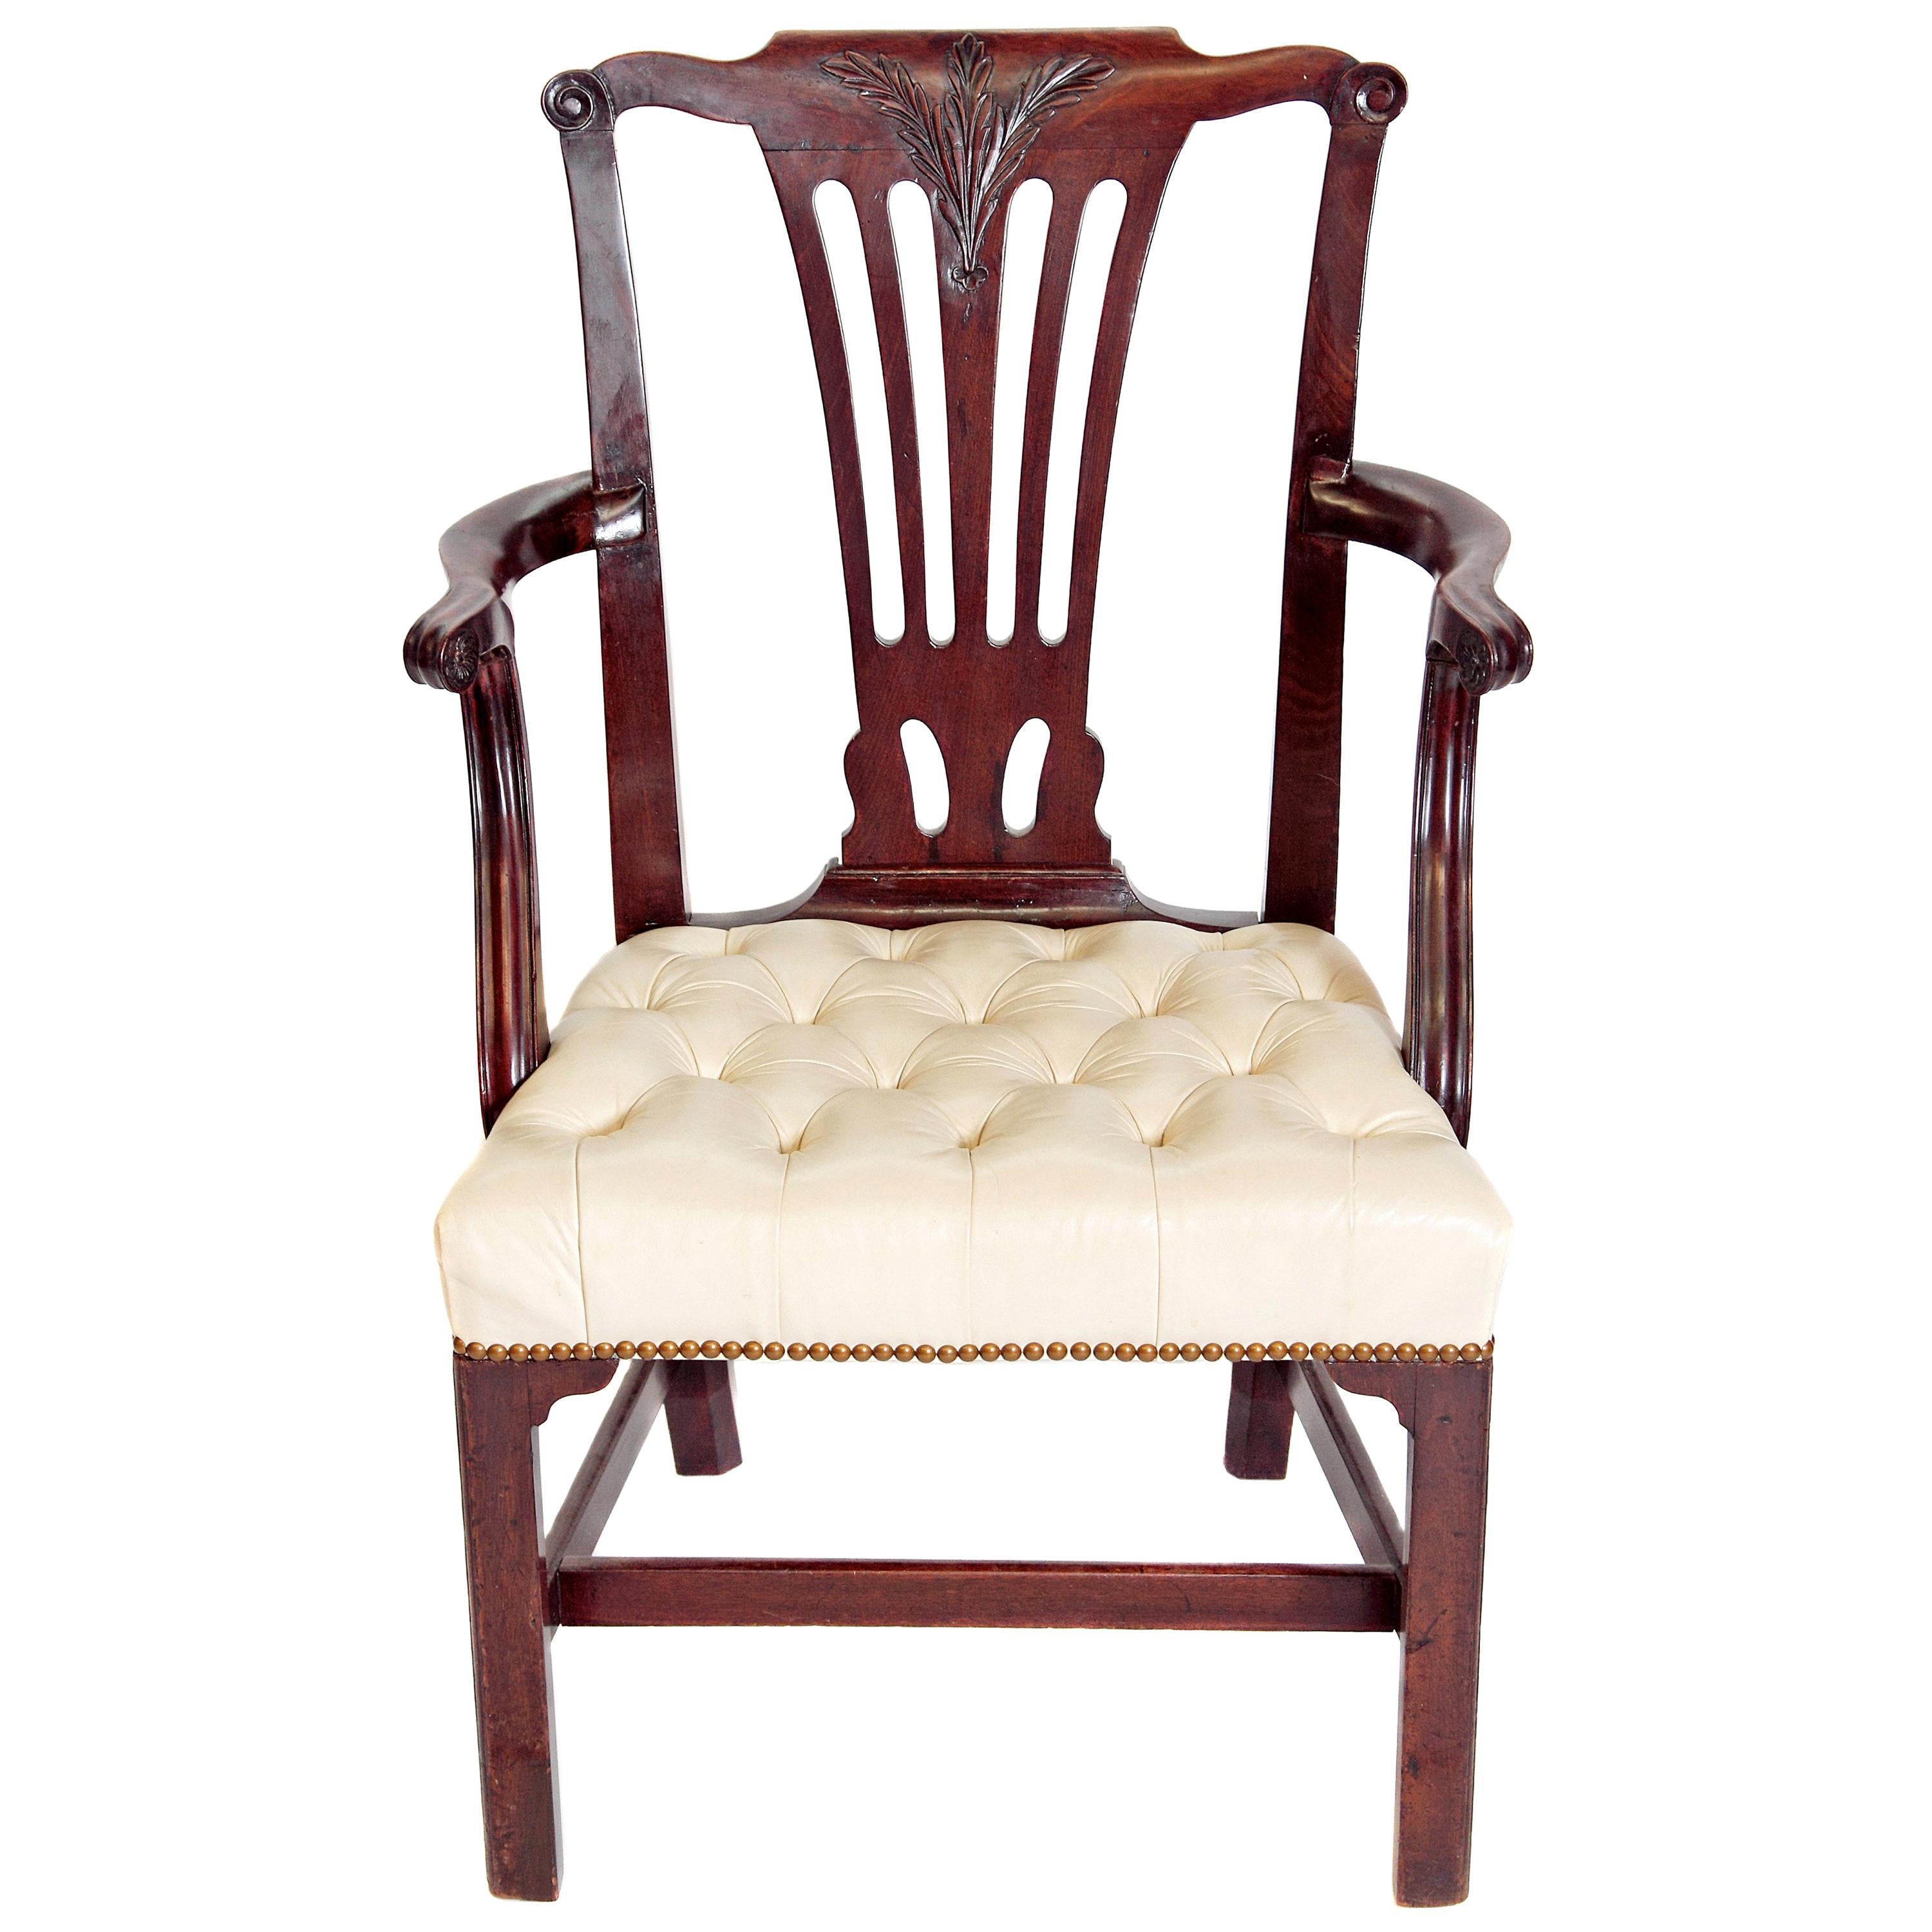 Late 18th Century Chippendale Mahogany Armchair